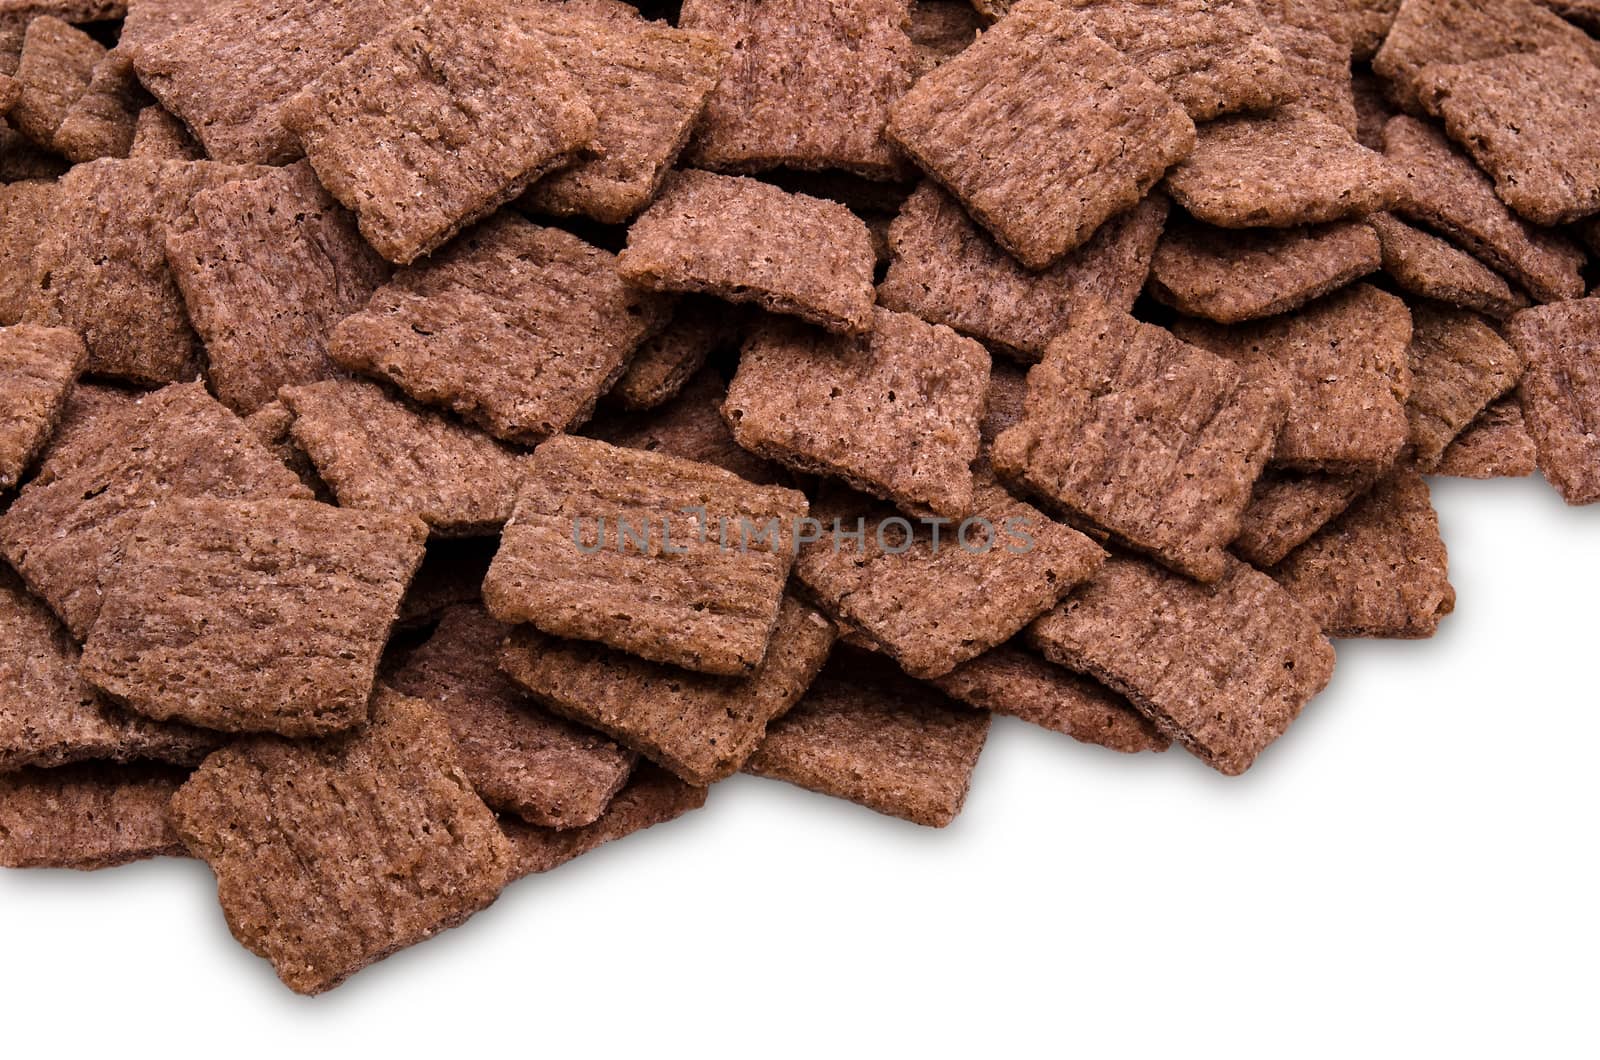 Red rice crackers on white background